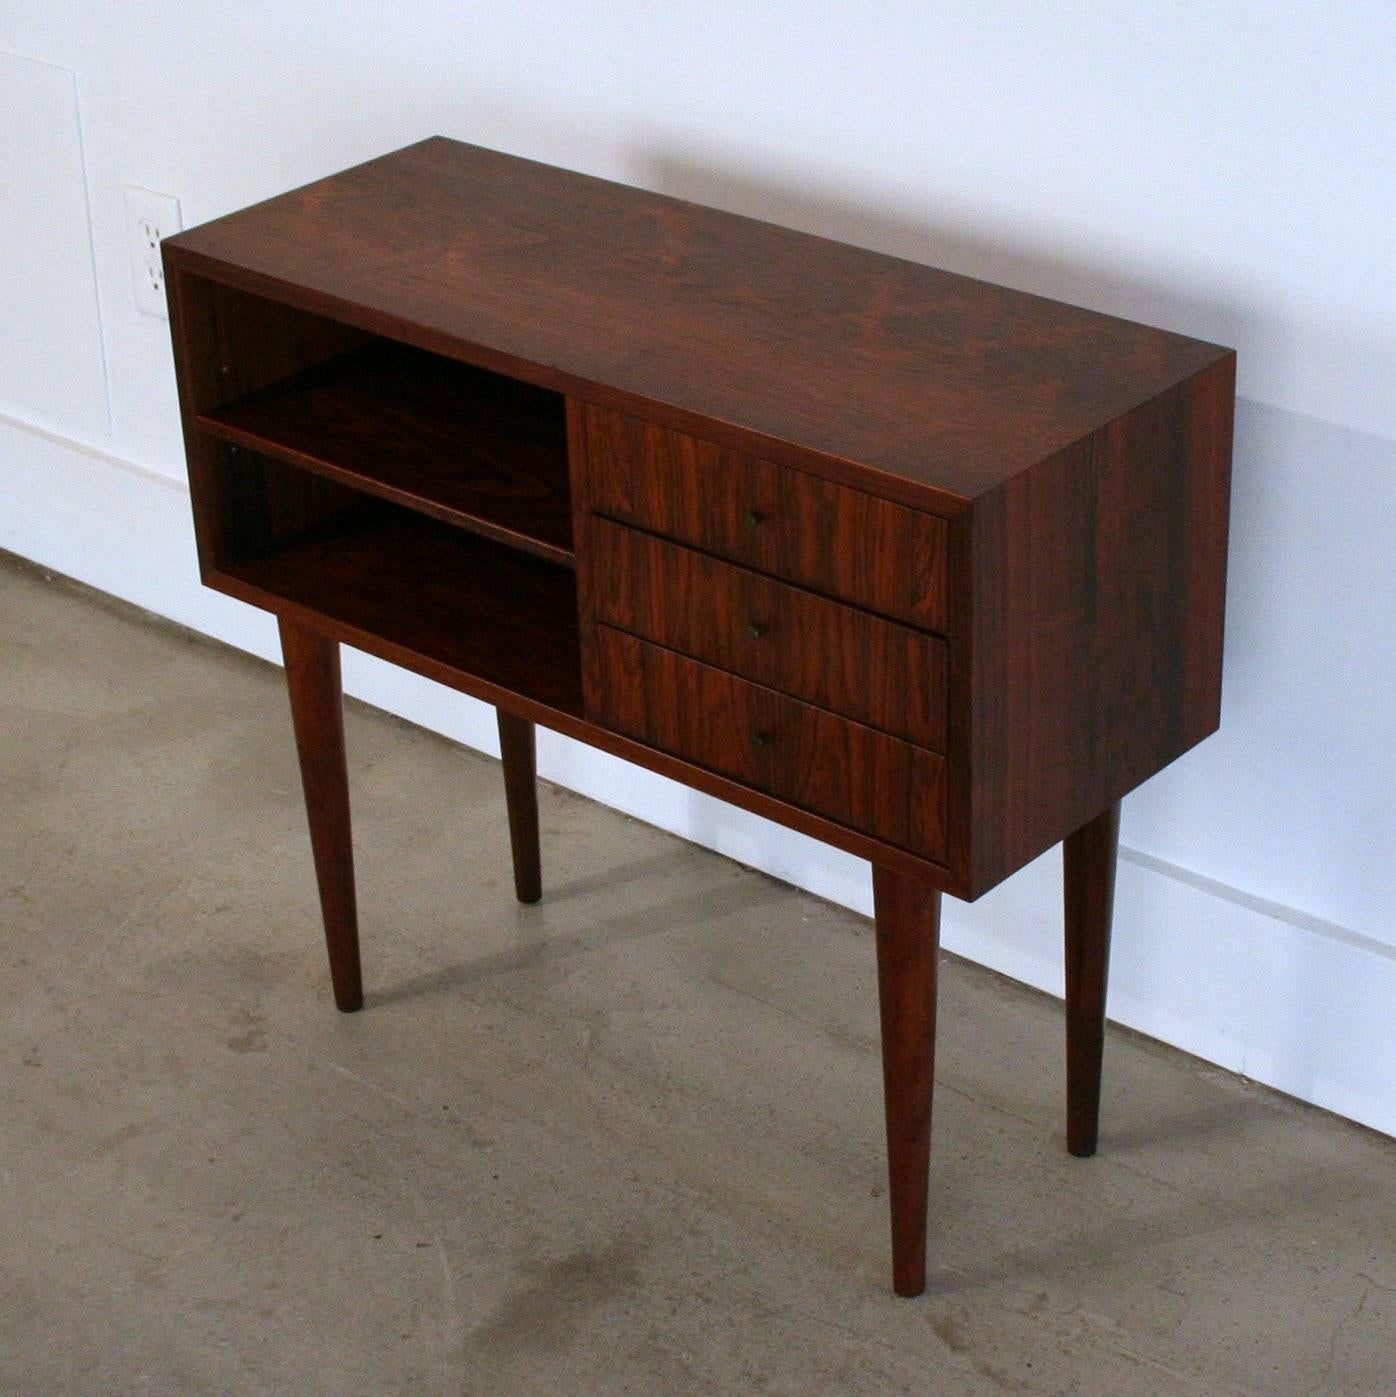 Incredible pair of Brazilian rosewood end tables. Small bank of three drawers beside open storage with an adjustable shelf. Resting on solid rosewood conical legs. Each end table mirrors each other to bookend a bed or sofa. Sold separately.